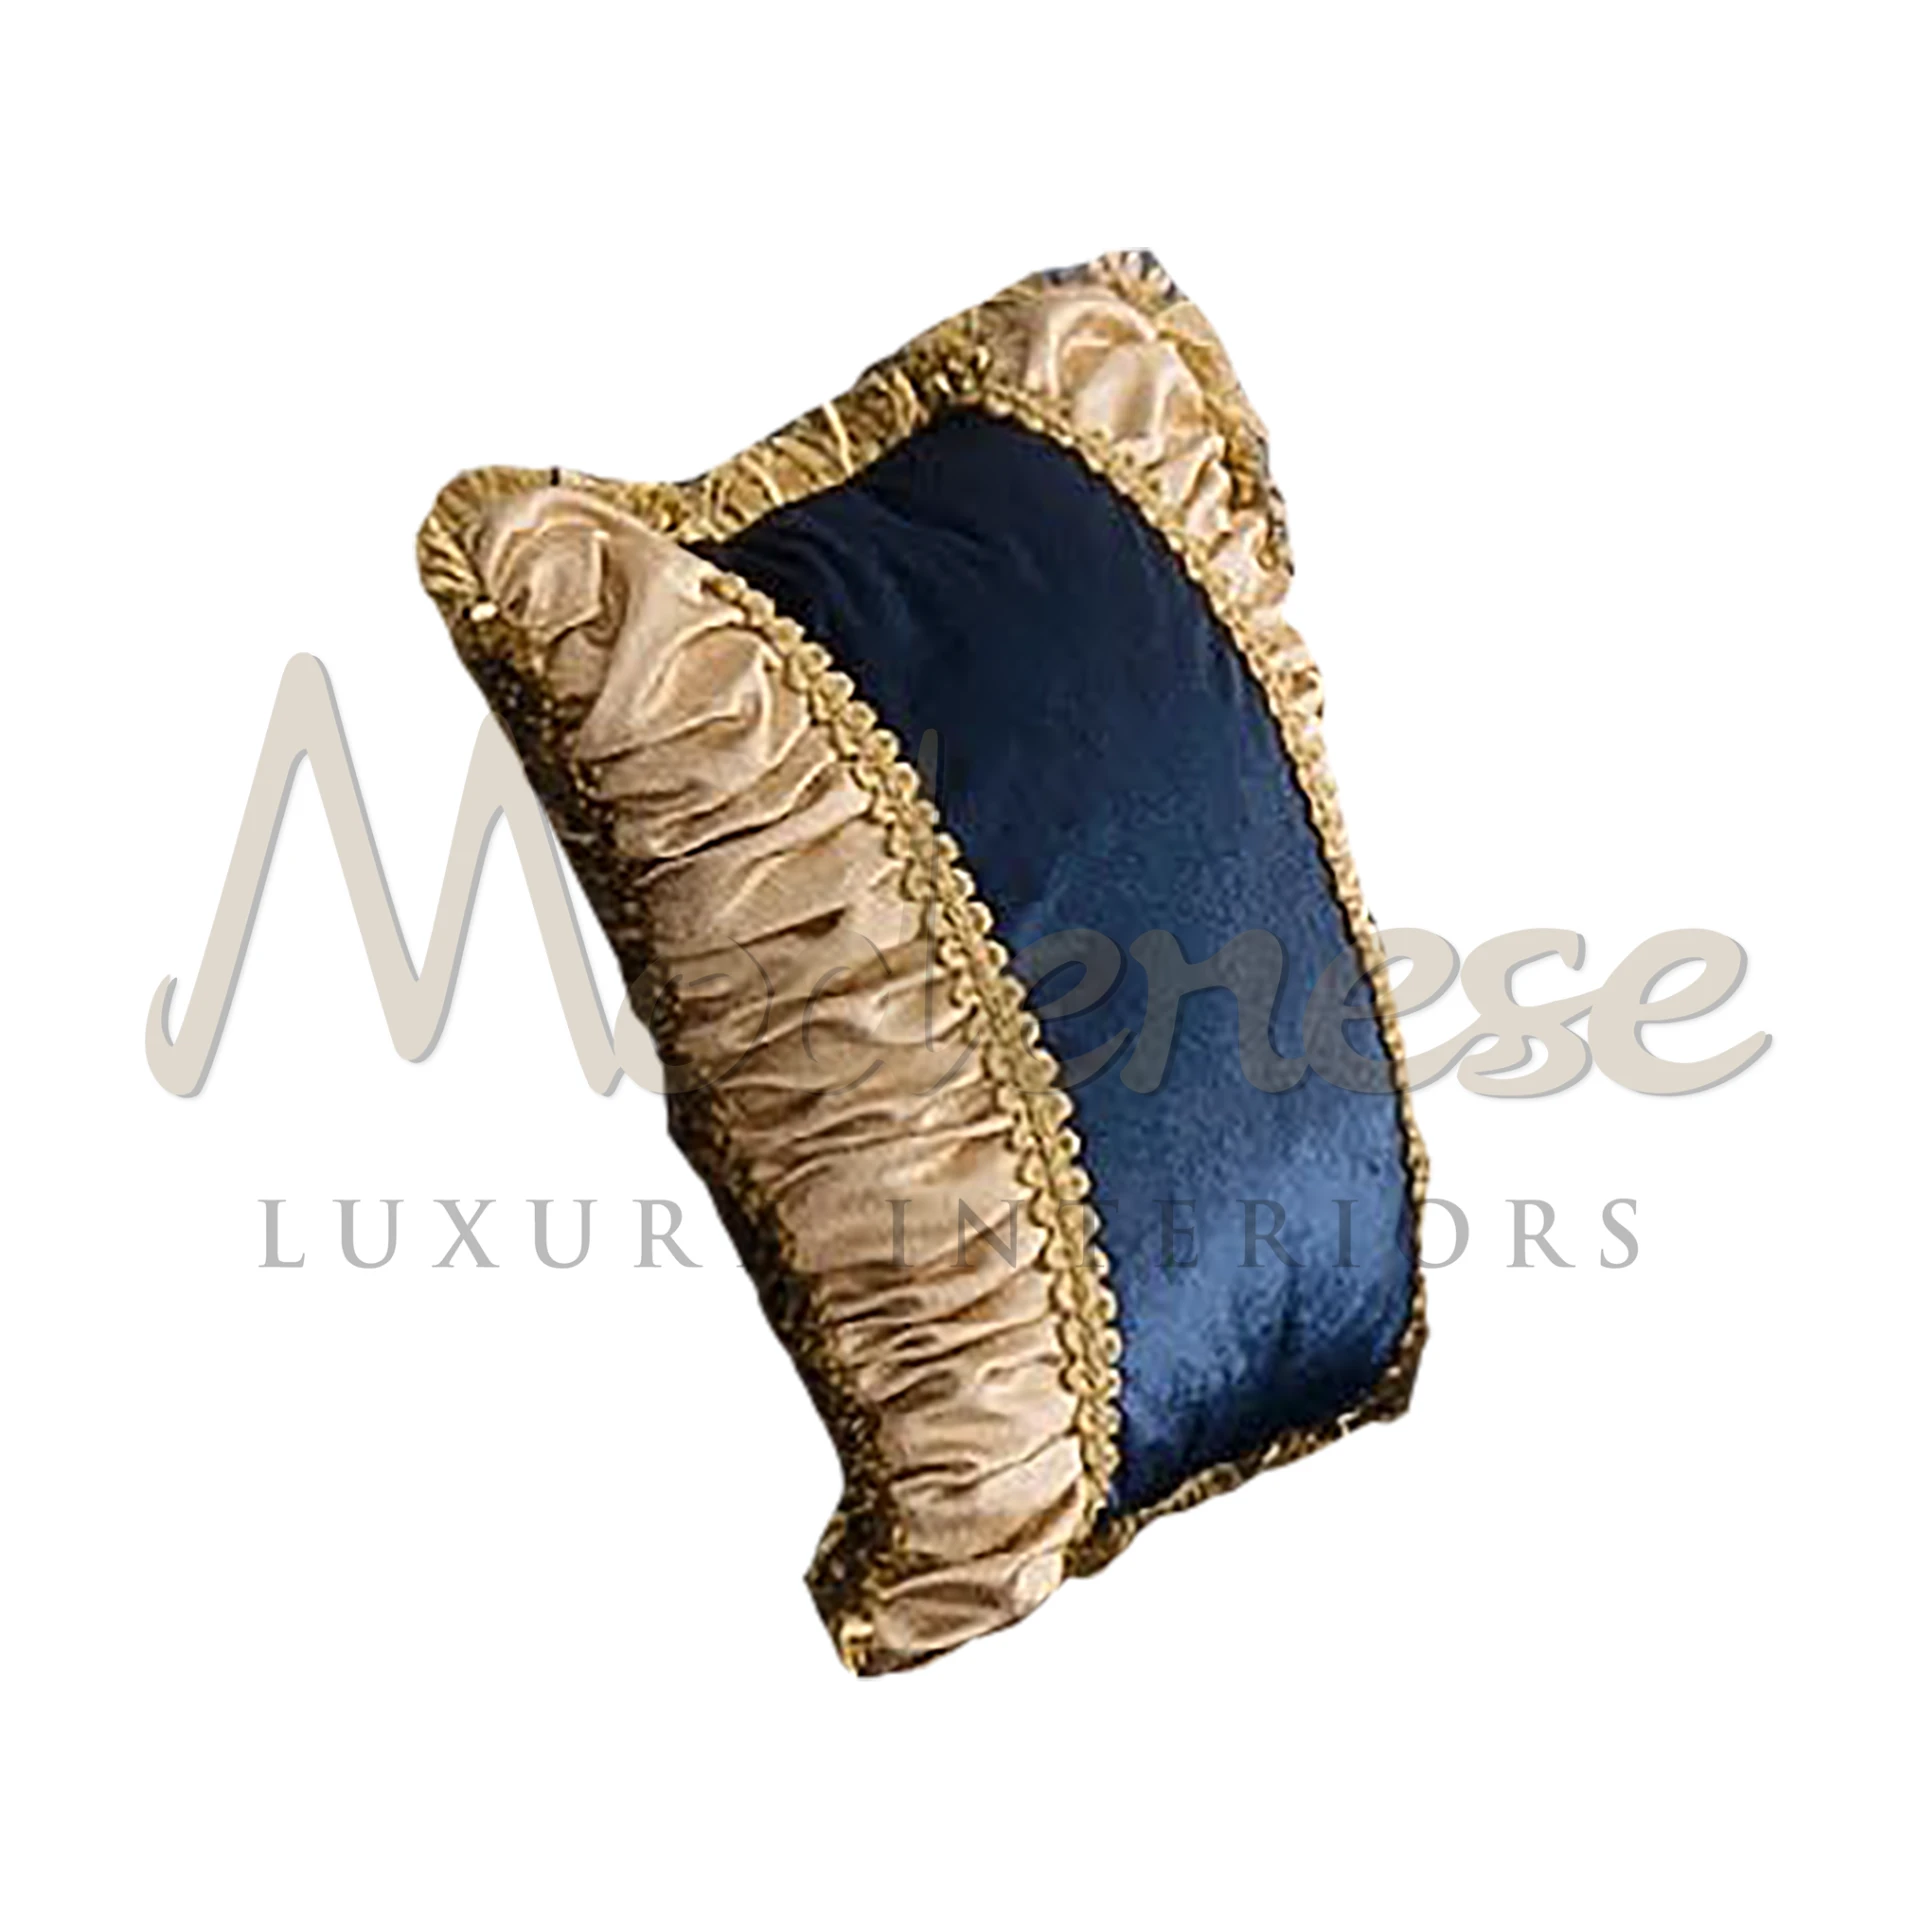 Royal Blue Pillow with intricate damask patterns, embodying the luxury and opulence of Italian high-quality textiles.